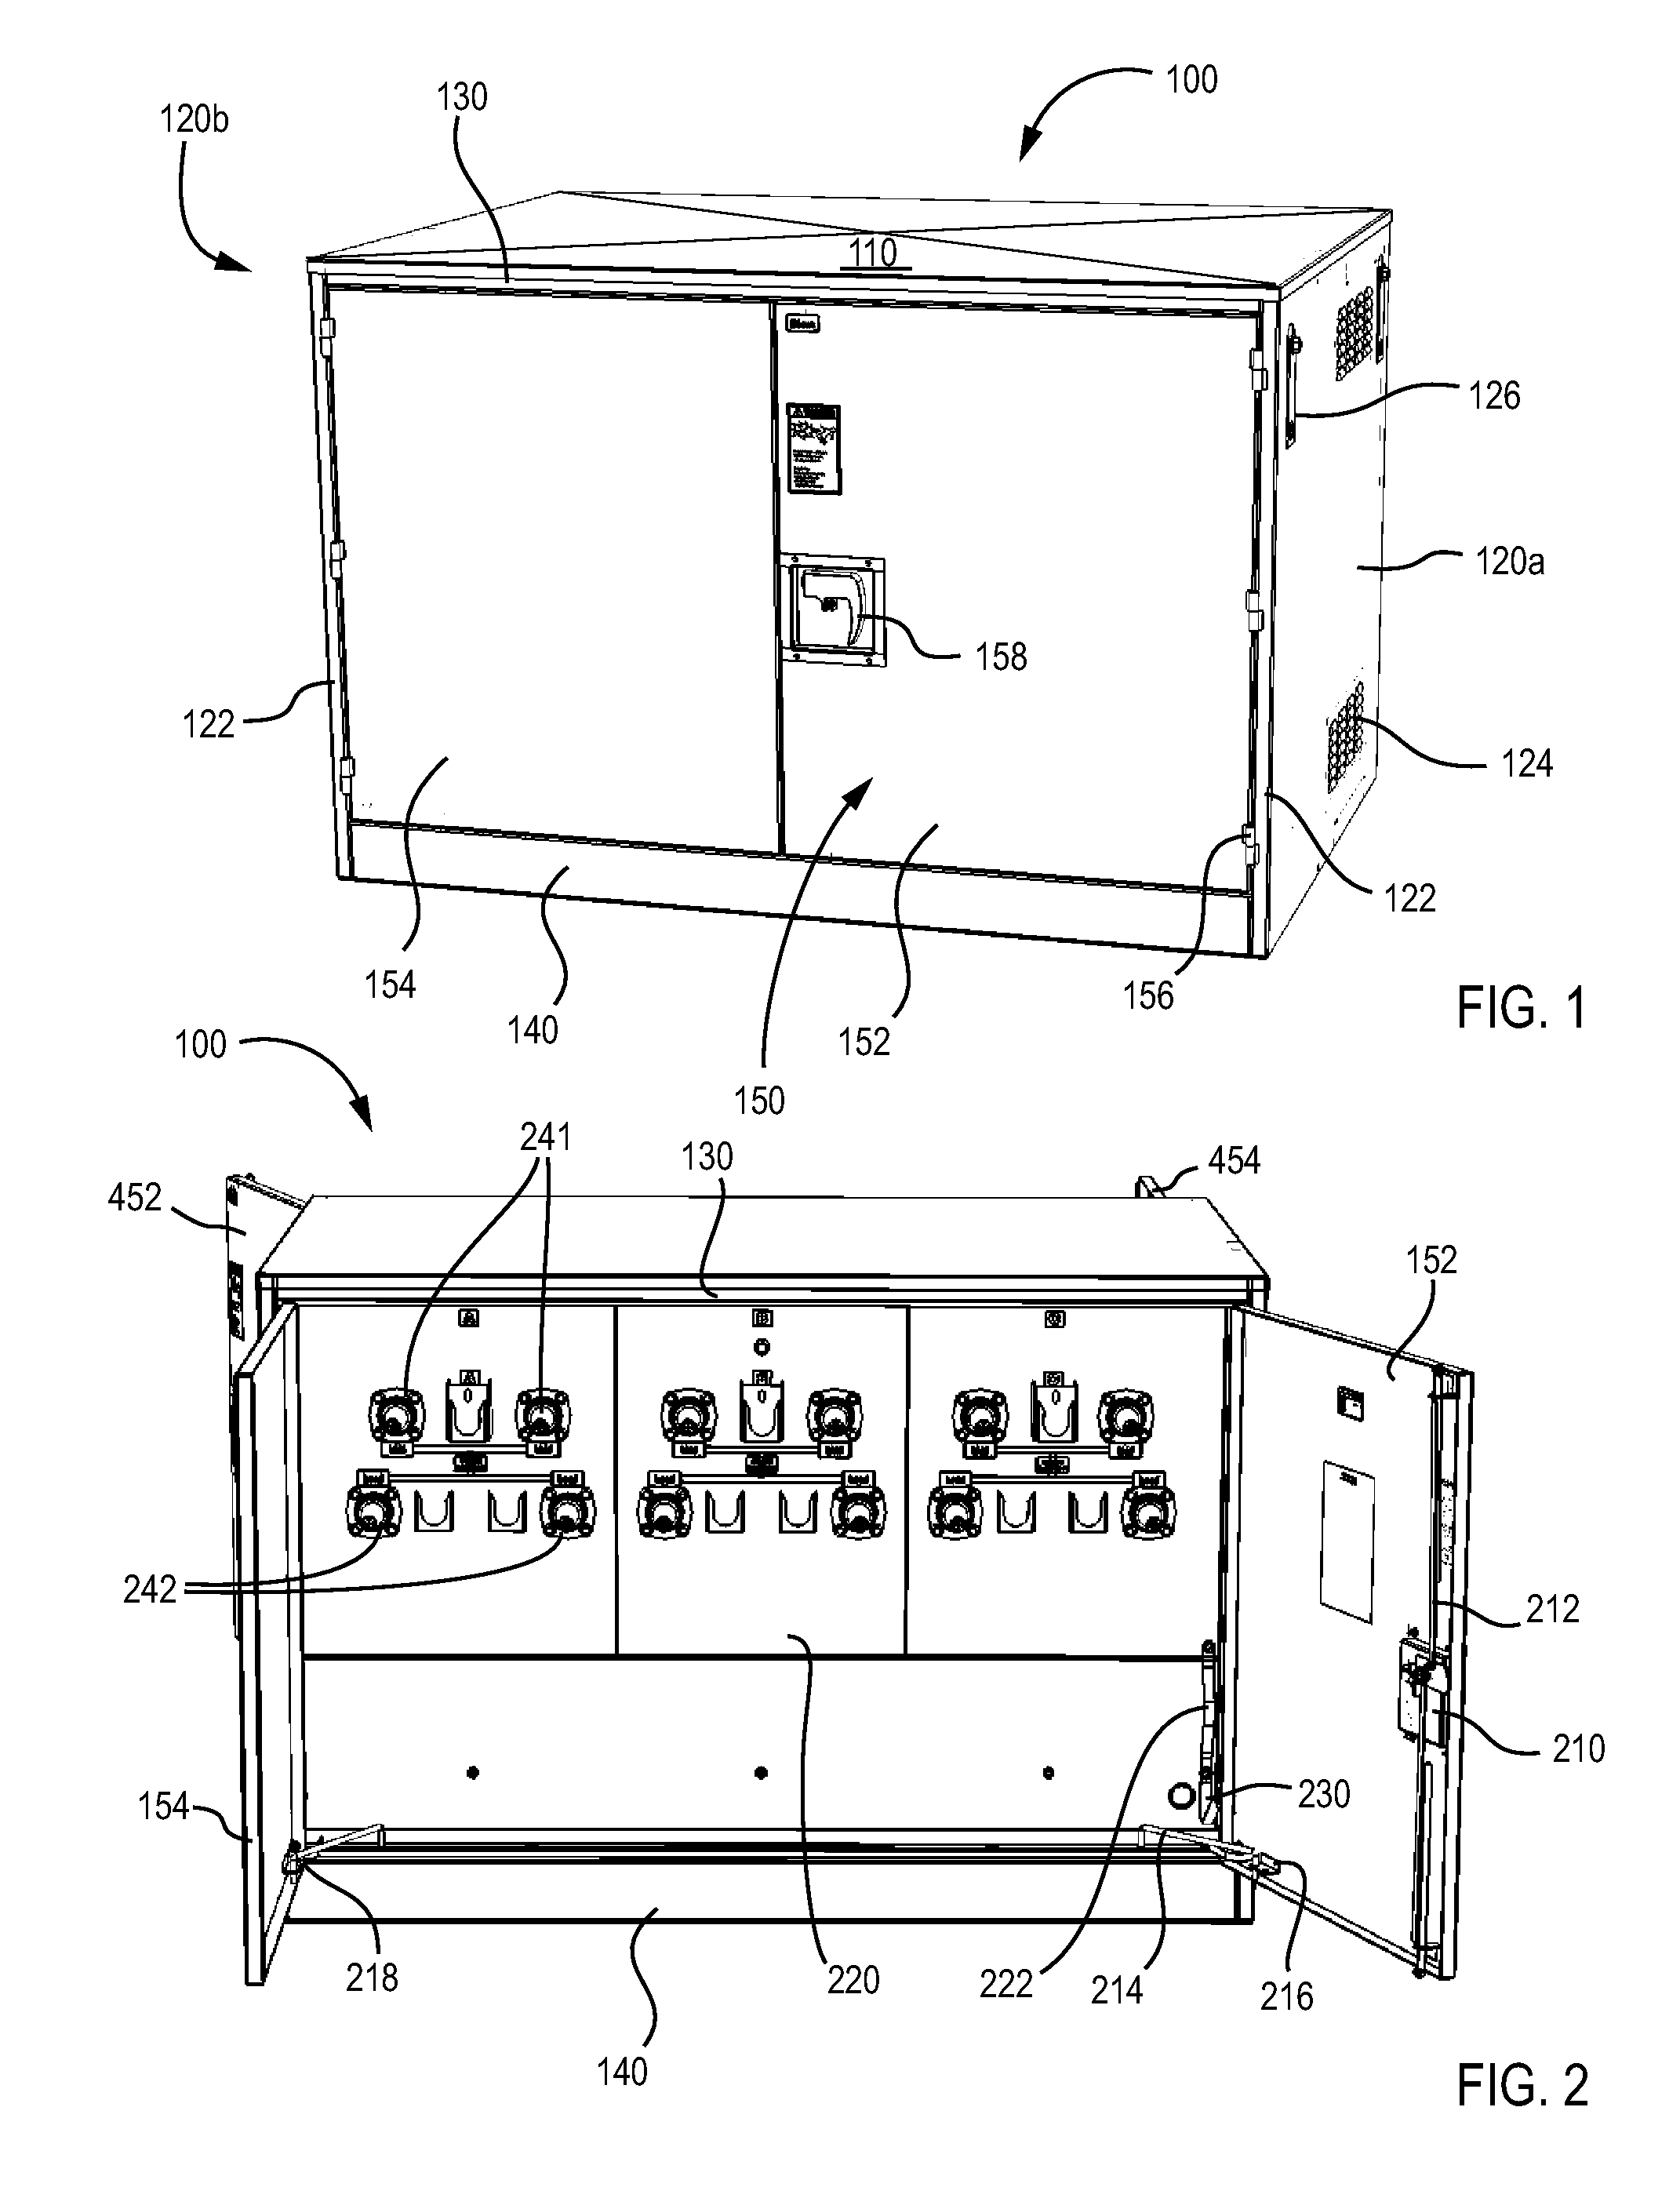 Enclosure system and method for facilitating installation of electrical equipment